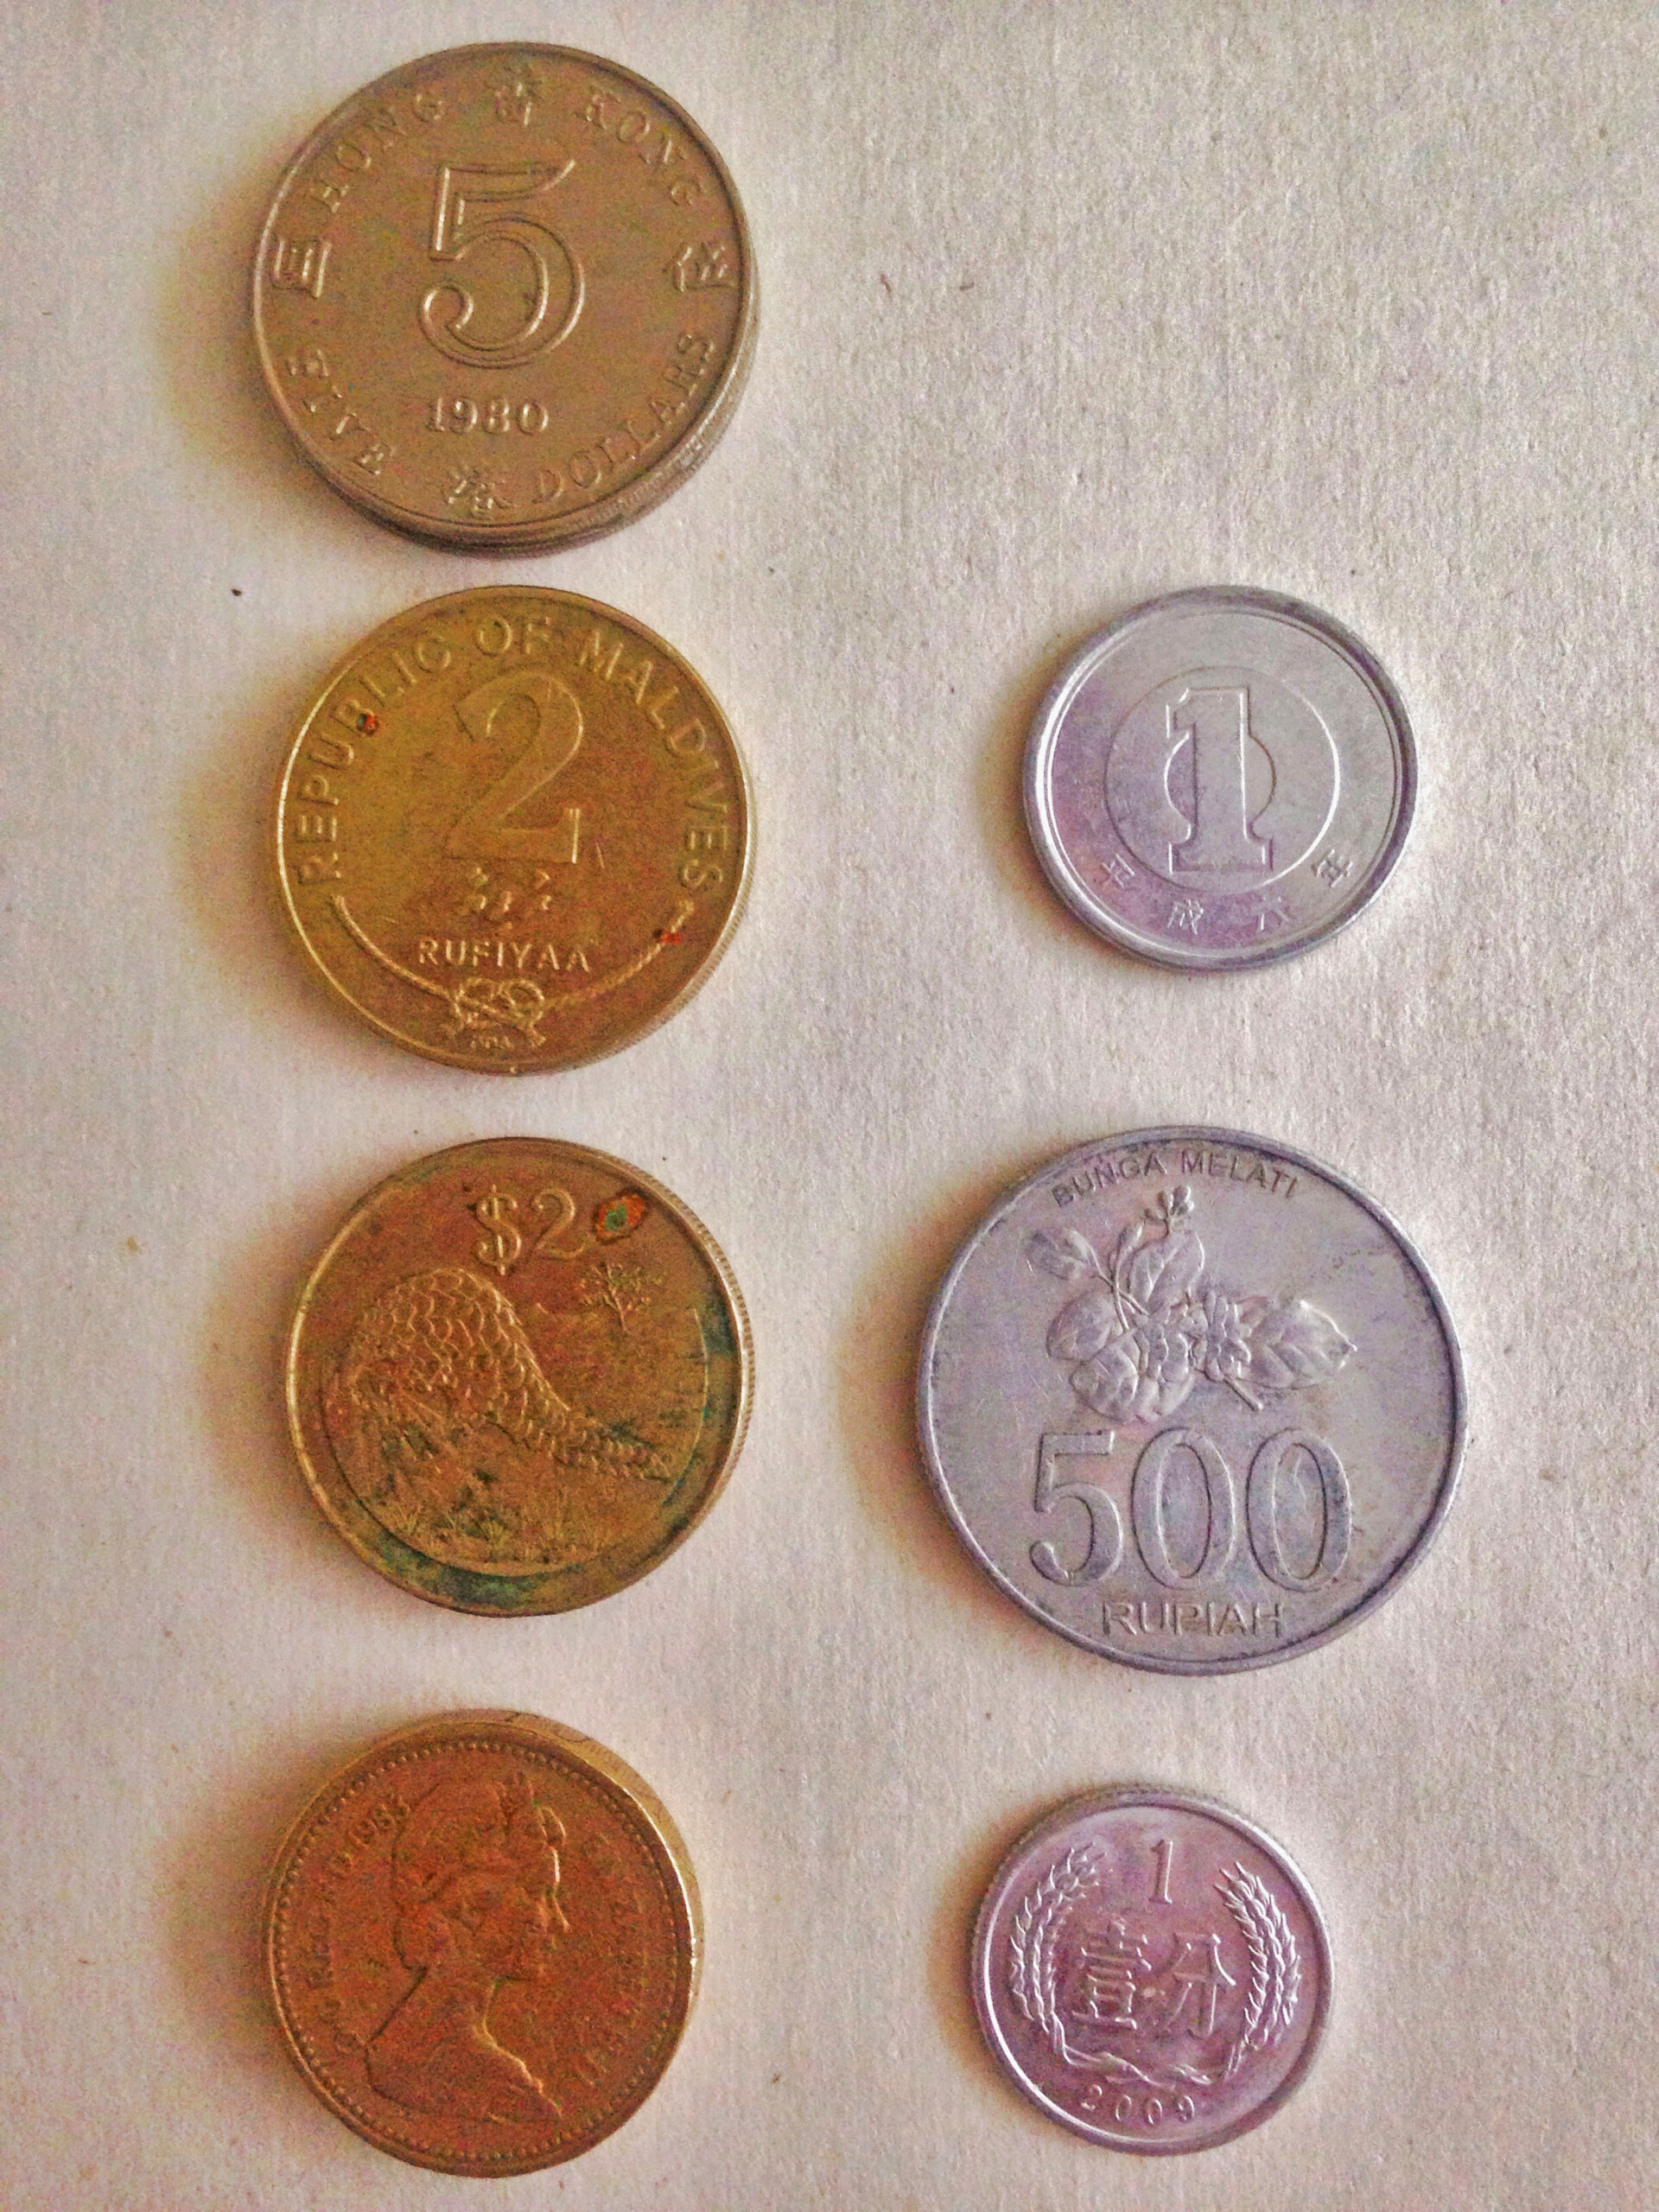 (from left to right) Heavy to Light Obnoxious Coins